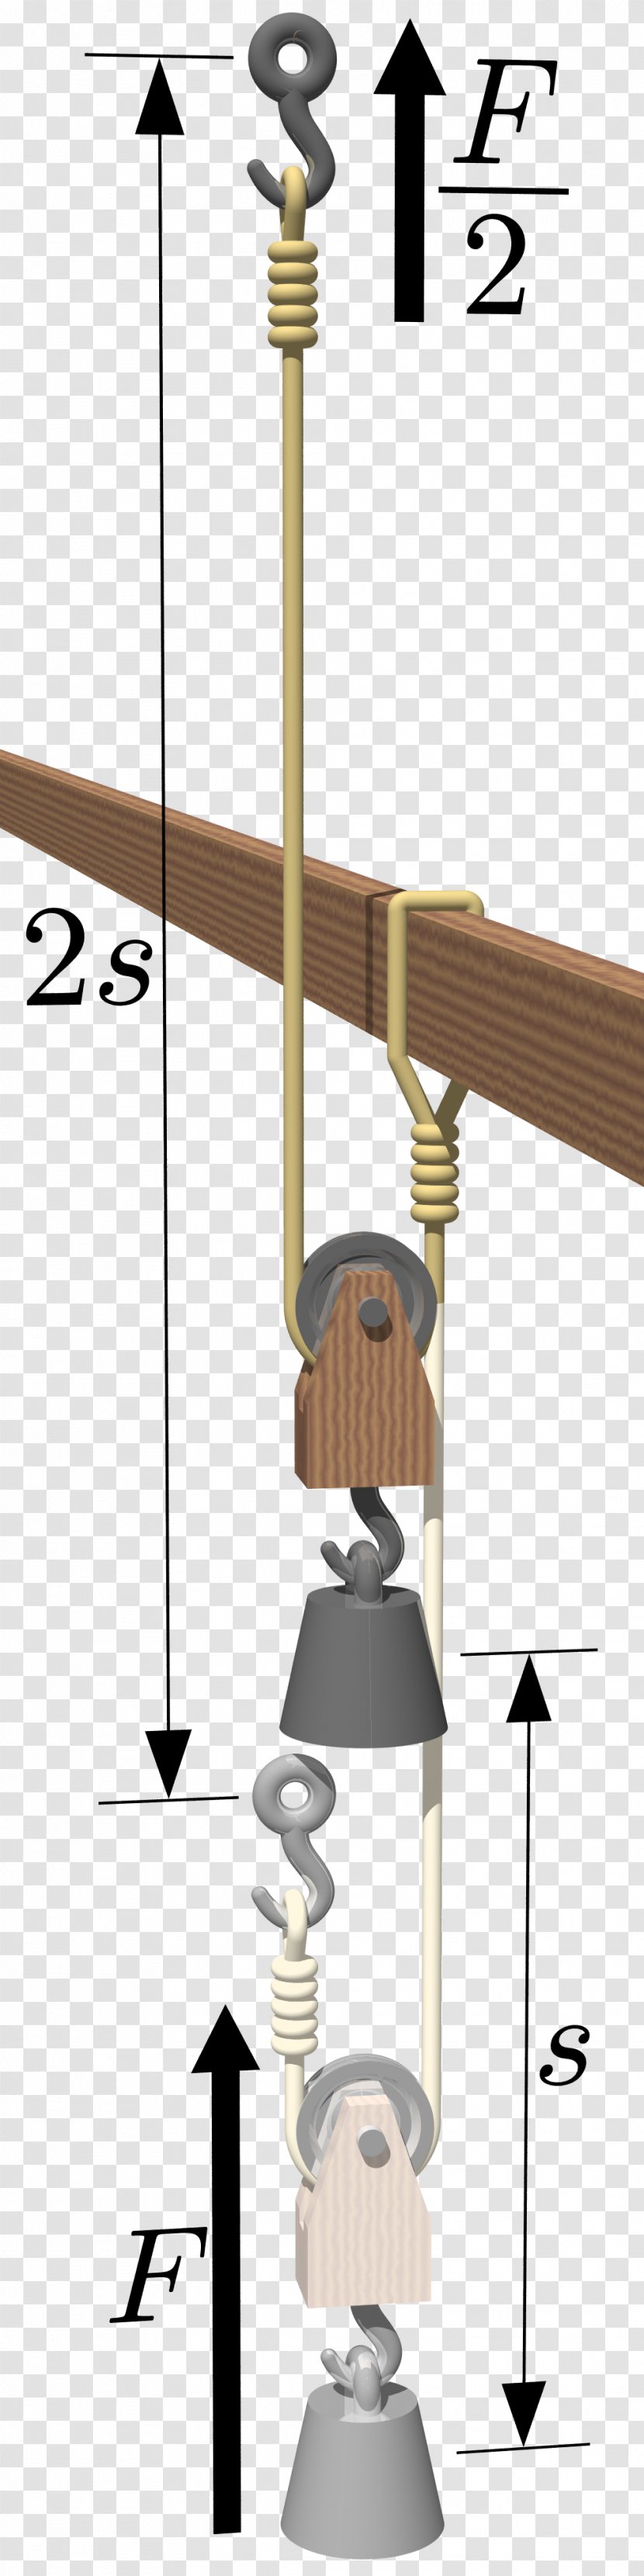 Pulley Rope Force Crane Counterweight - Antuca Transparent PNG